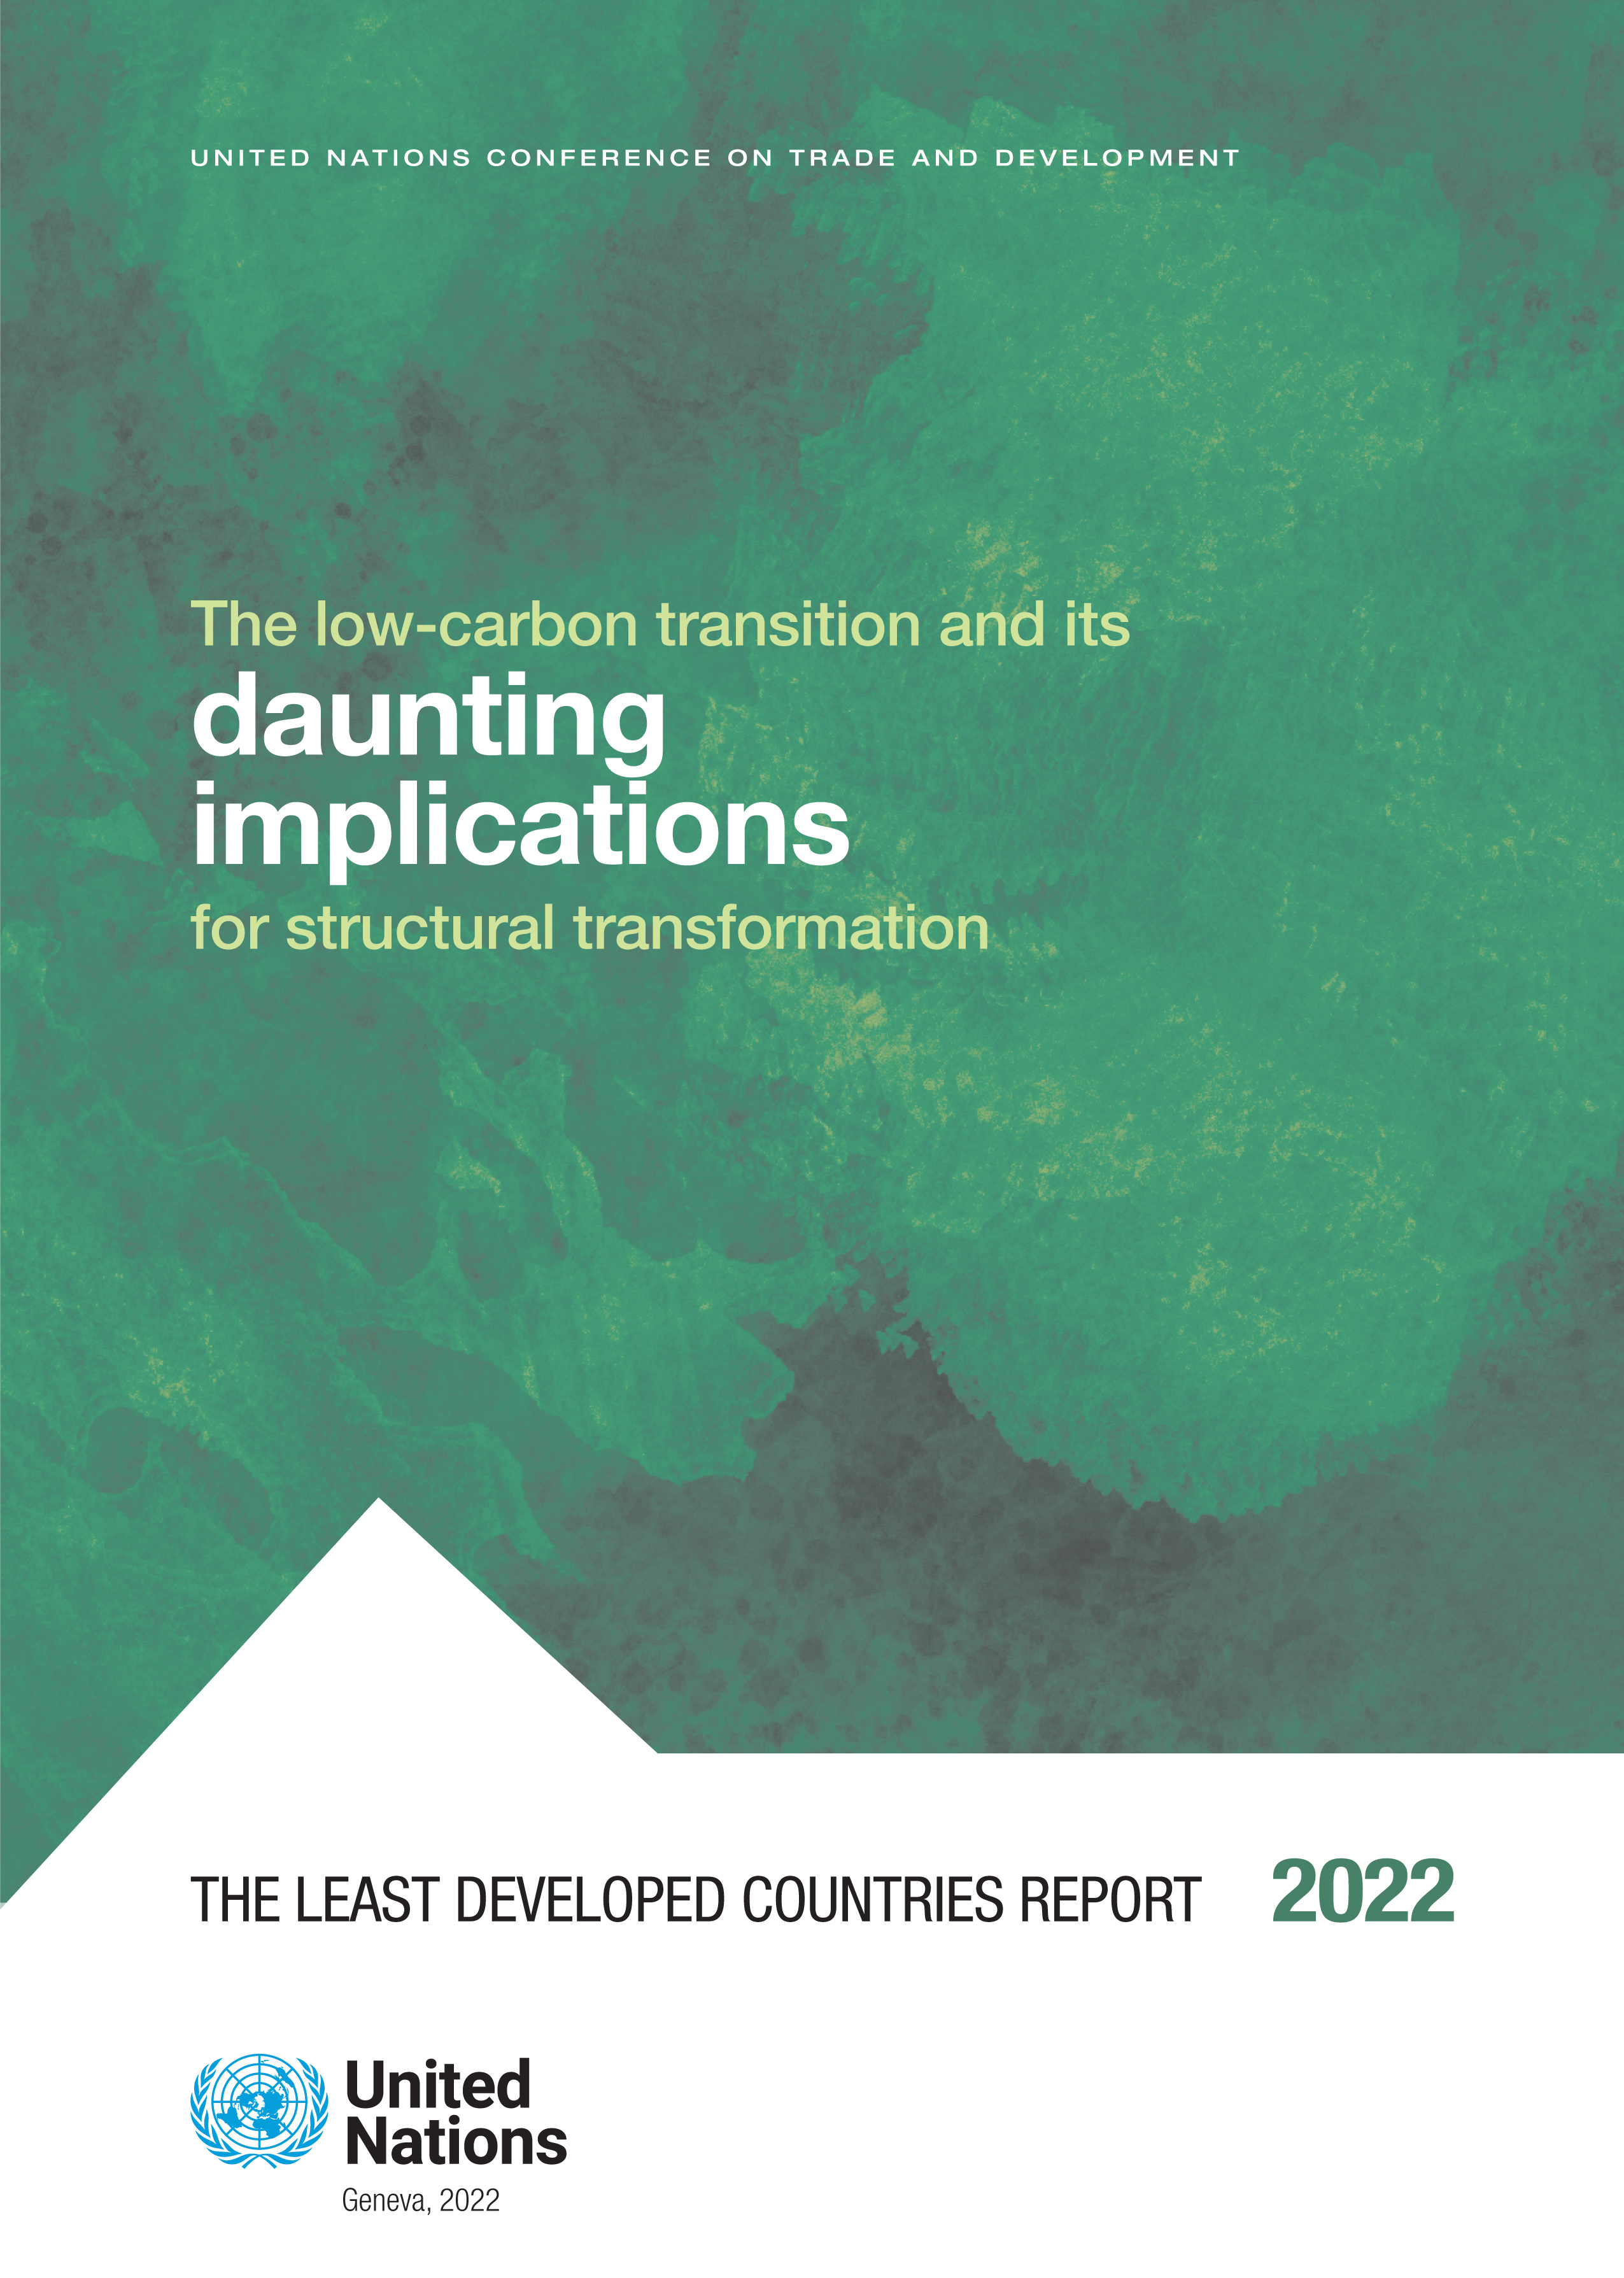 The Least Developed Countries Report 2022